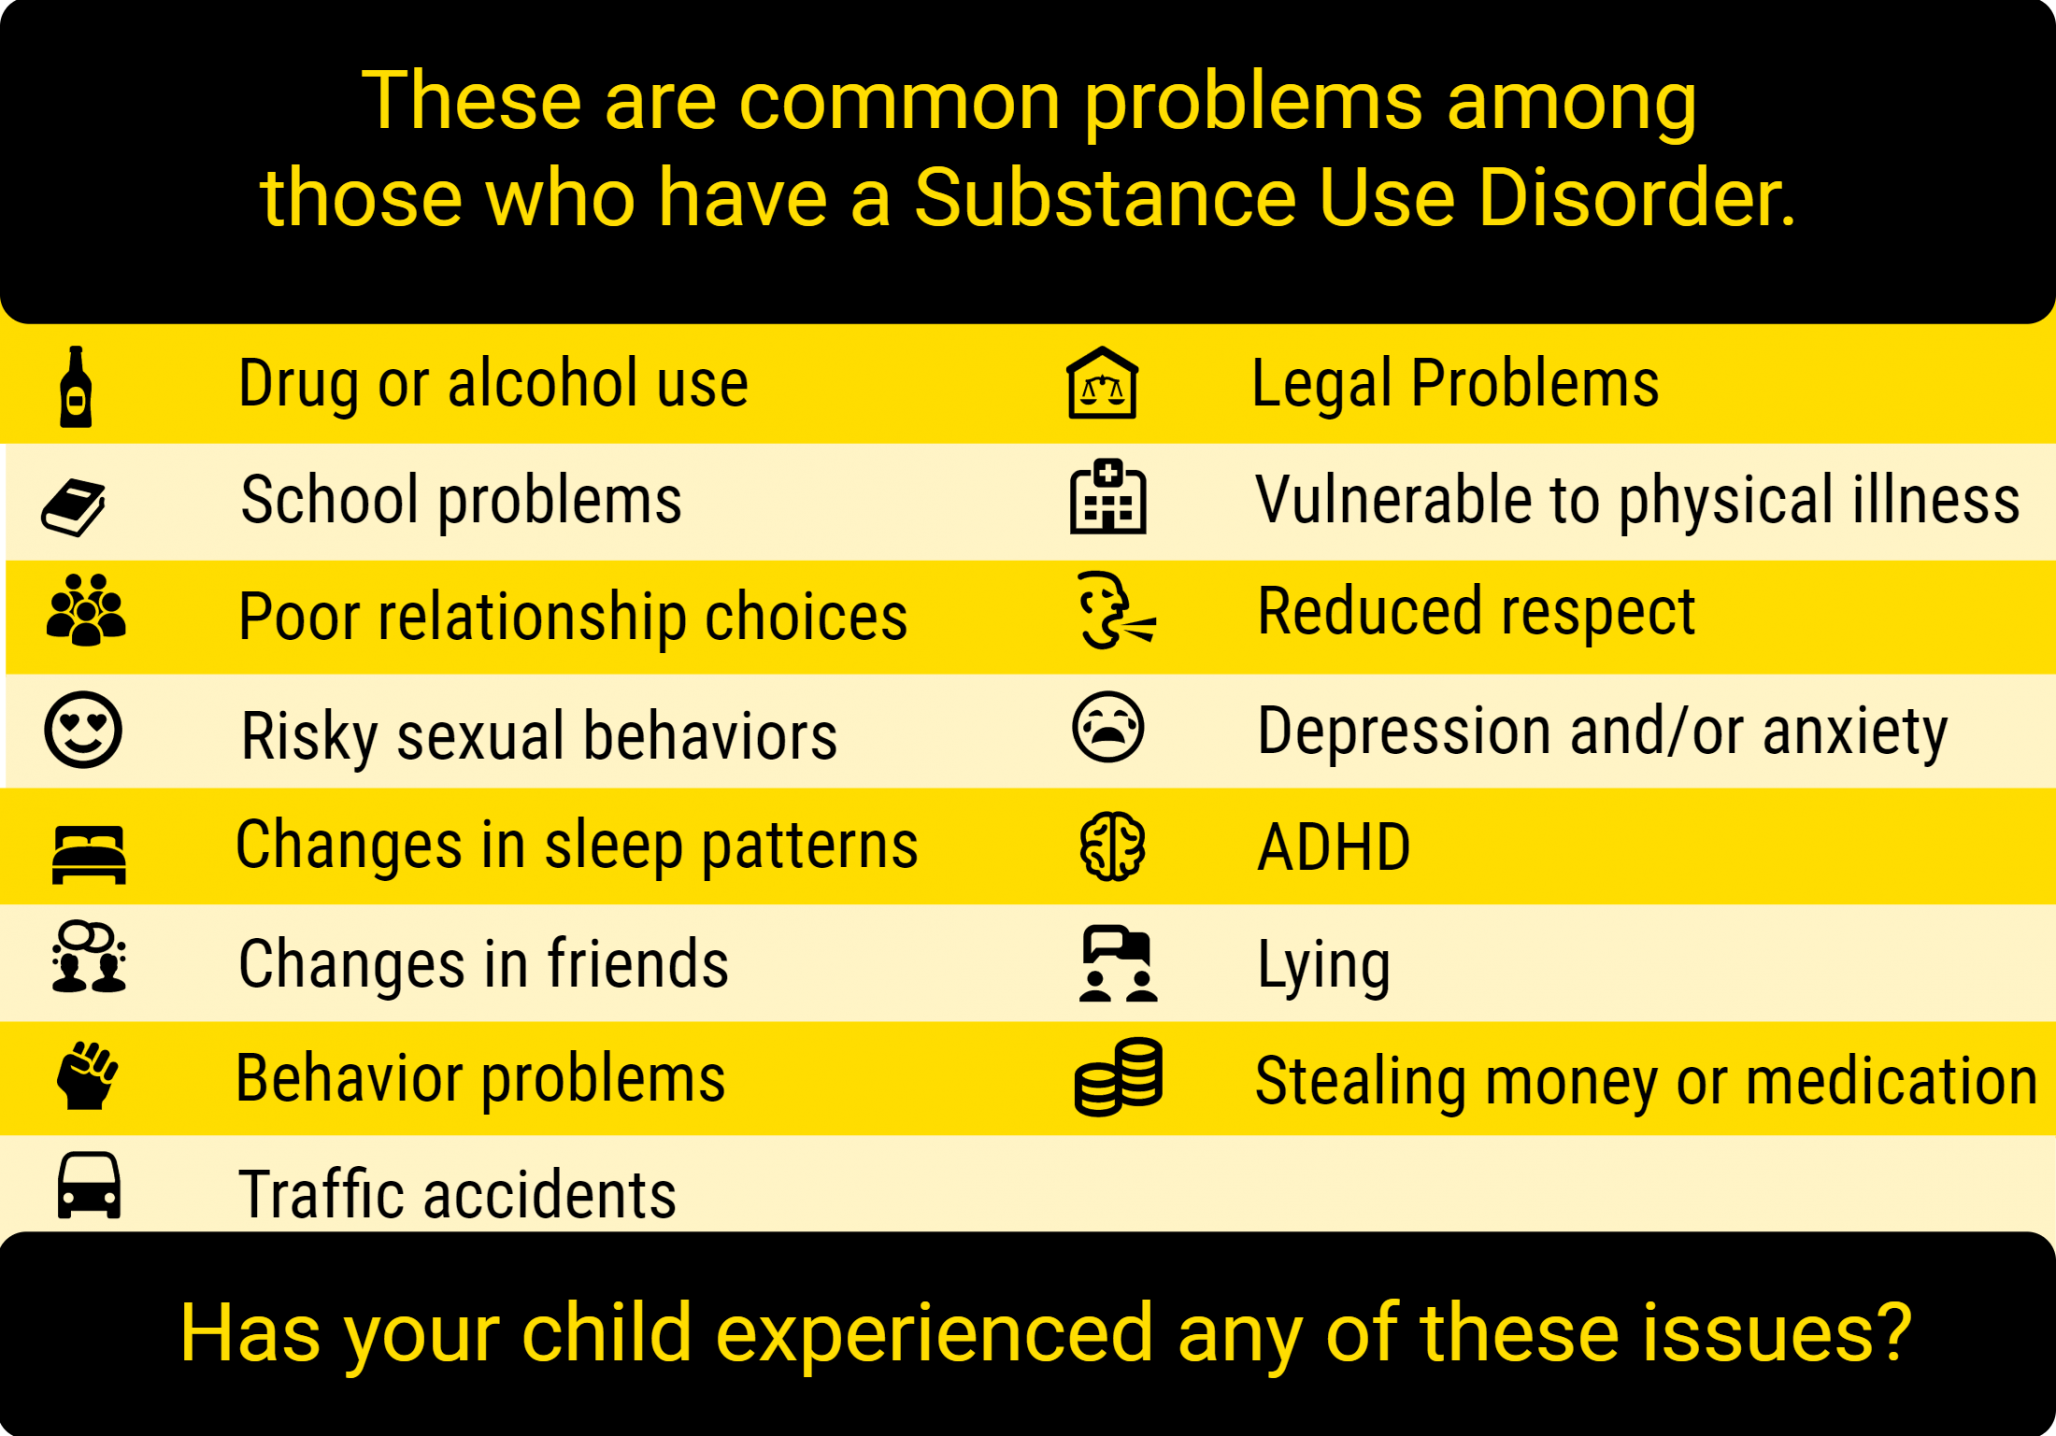 Common Problems Among those with Substance Use Disorders include: drug or alcohol use, school problems, poor relationship choices, risky sexual behavior, behavior problems, traffic accidents, legal problems, etc.